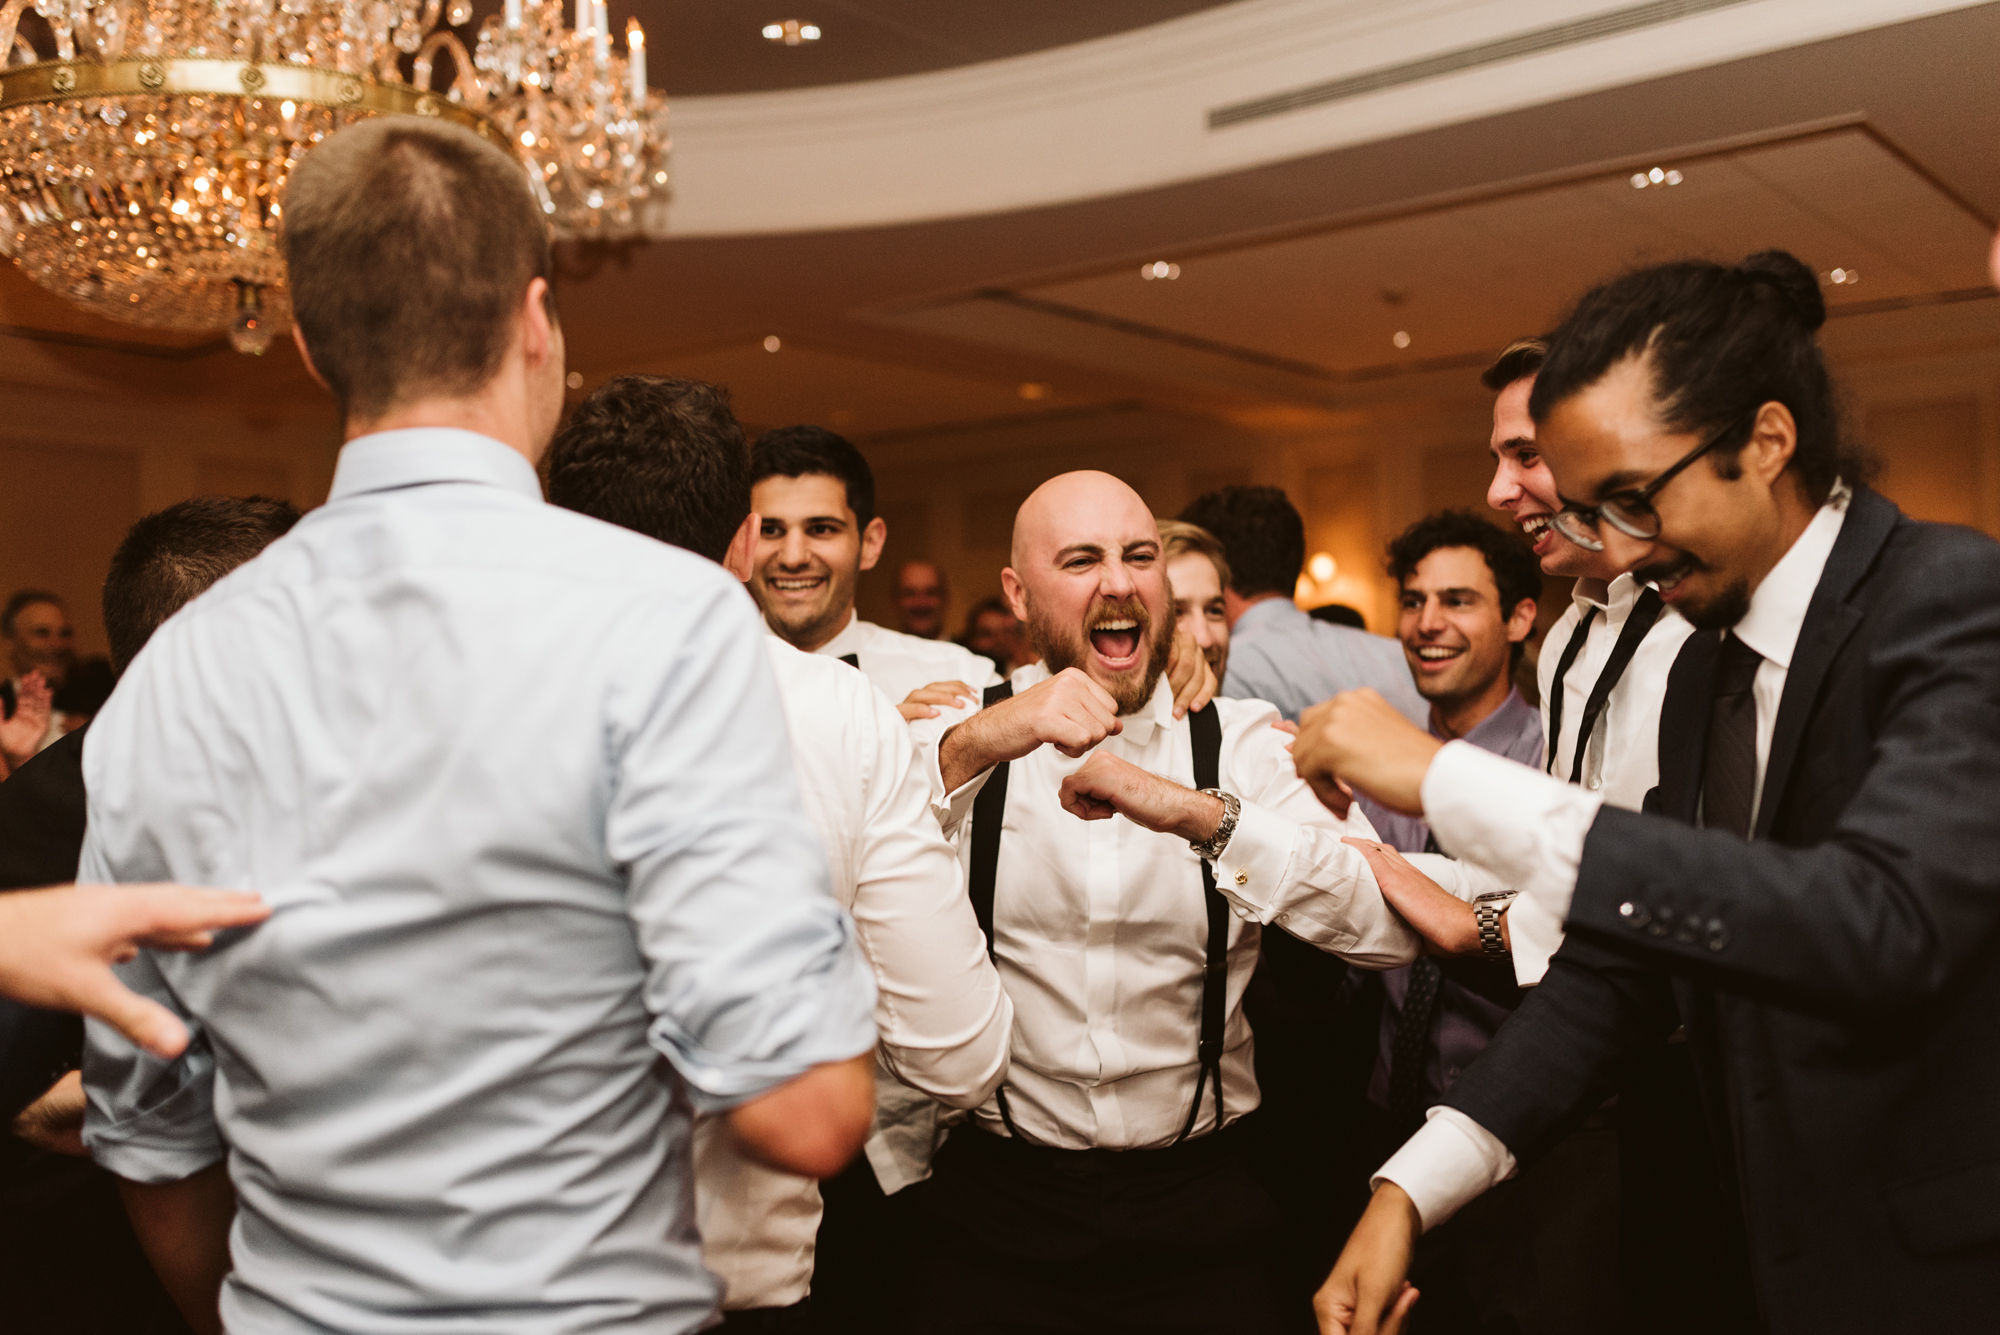 Elegant, Columbia Country Club, Chevy Chase Maryland, Baltimore Wedding Photographer, Classic, Traditional, Groom and Groomsmen Doing Awesome Dance Moves at Reception